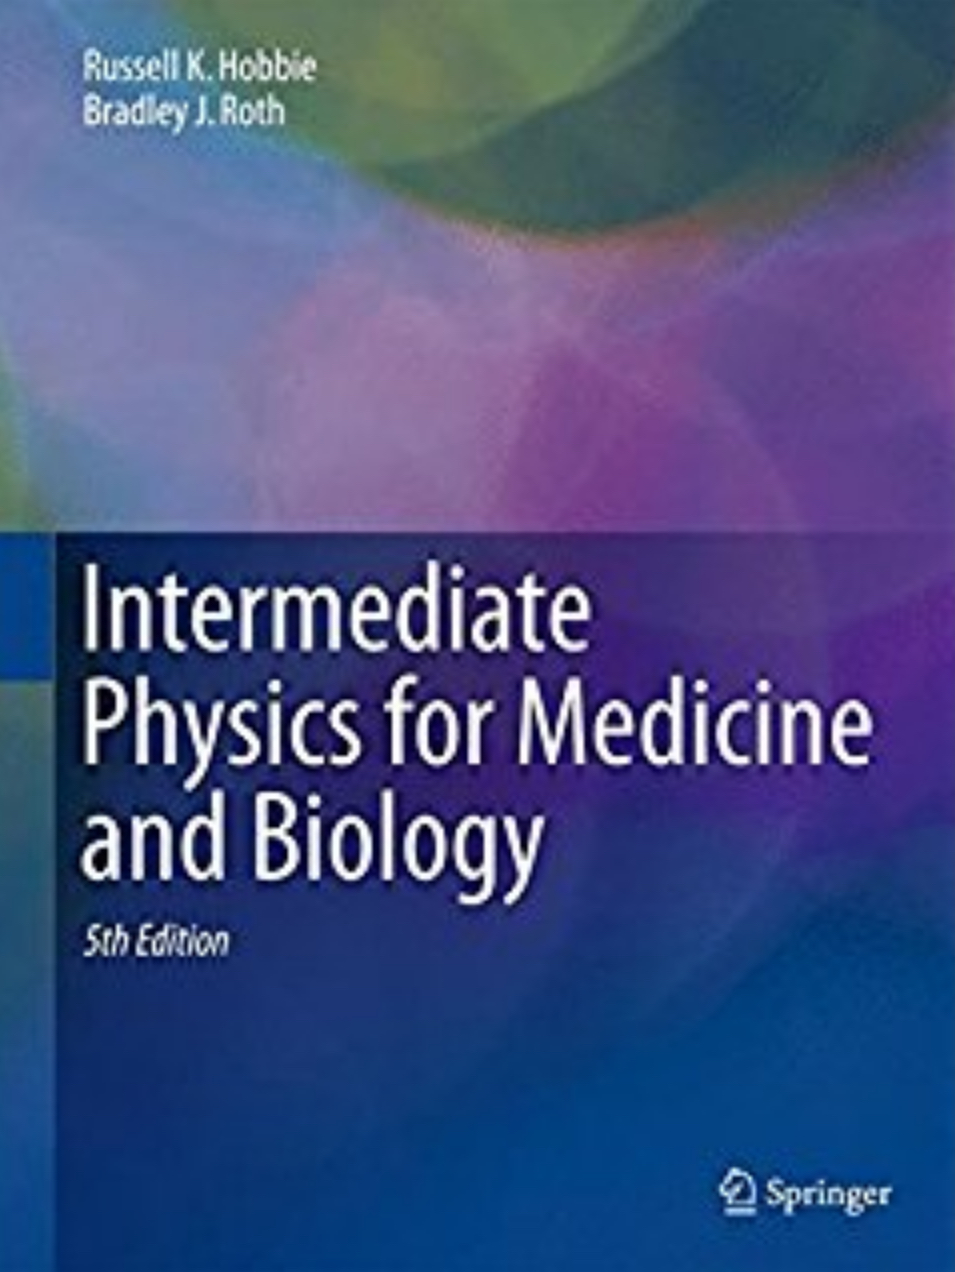 5th edition of Intermediate Physics for Medicine and Biology